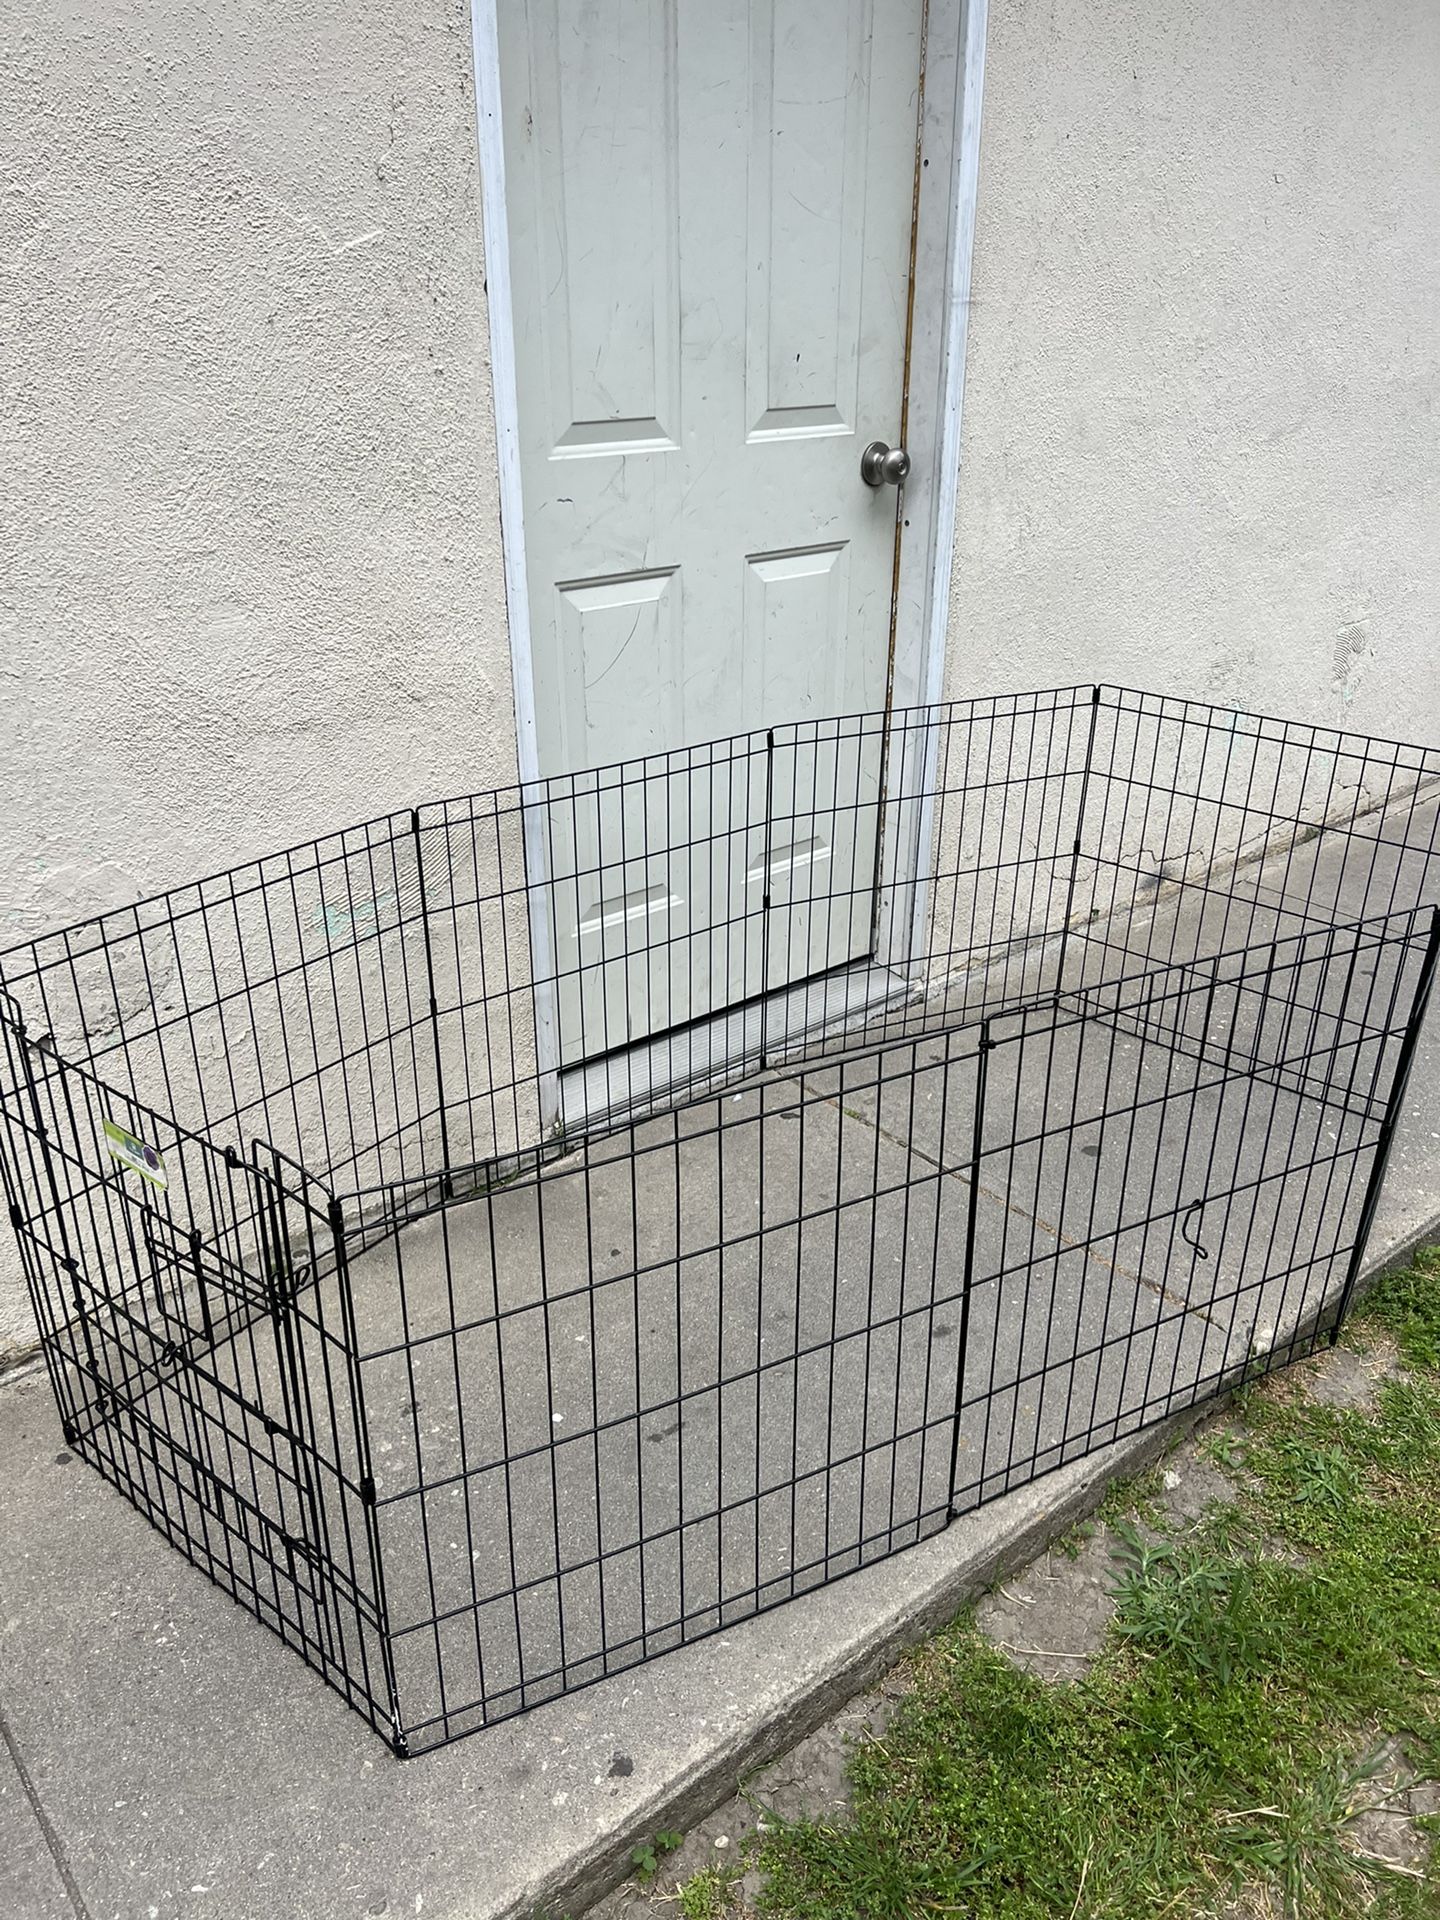 EXERCISE PEN FOR DOG 